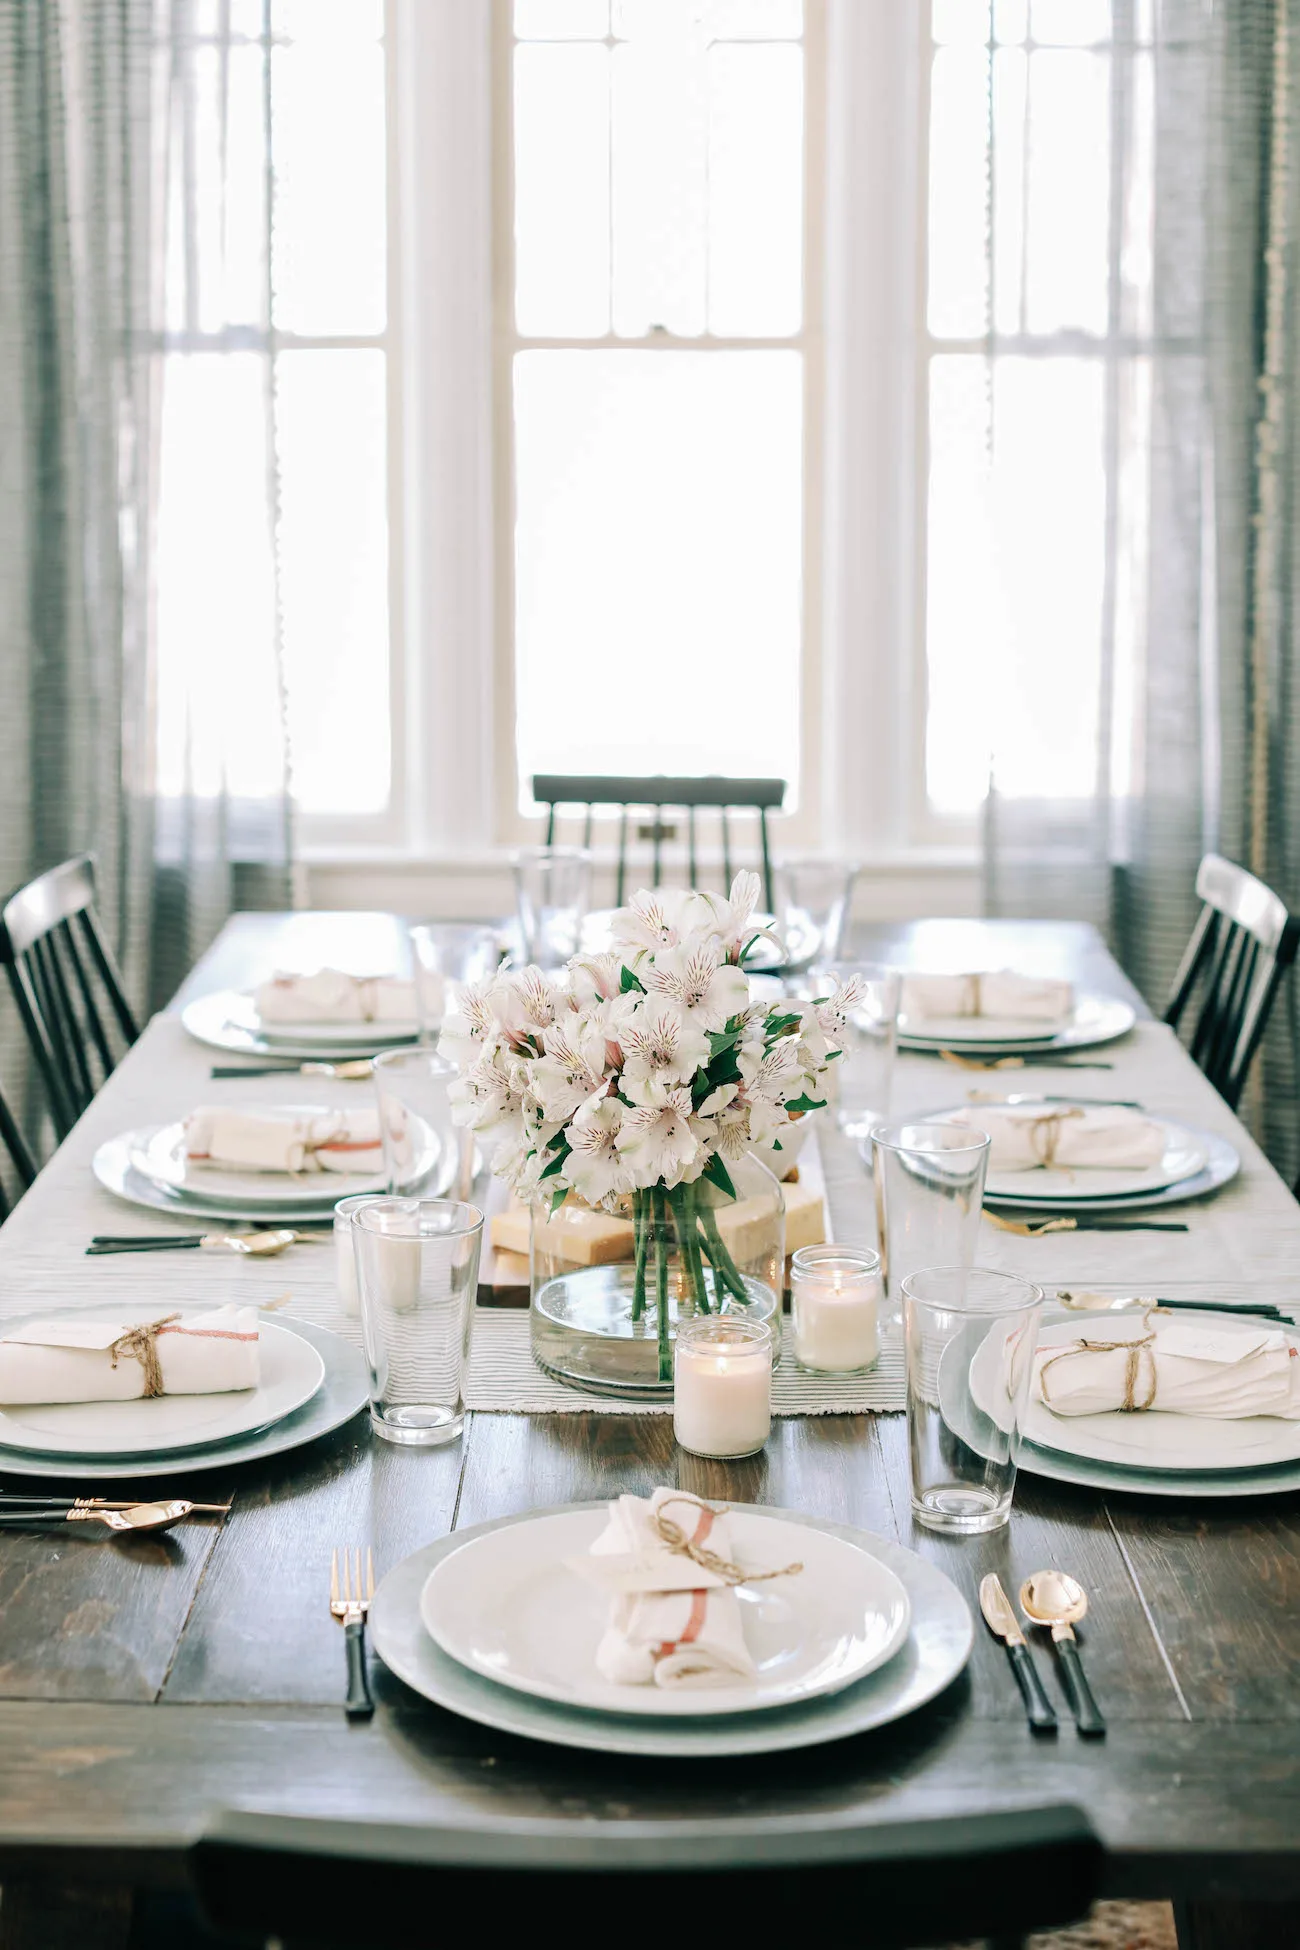 Setting the Table for a Casual Dinner Party | Dinner party ideas, party recipes, cocktail recipes and dinner party ideas from entertaining blog @cydconverse